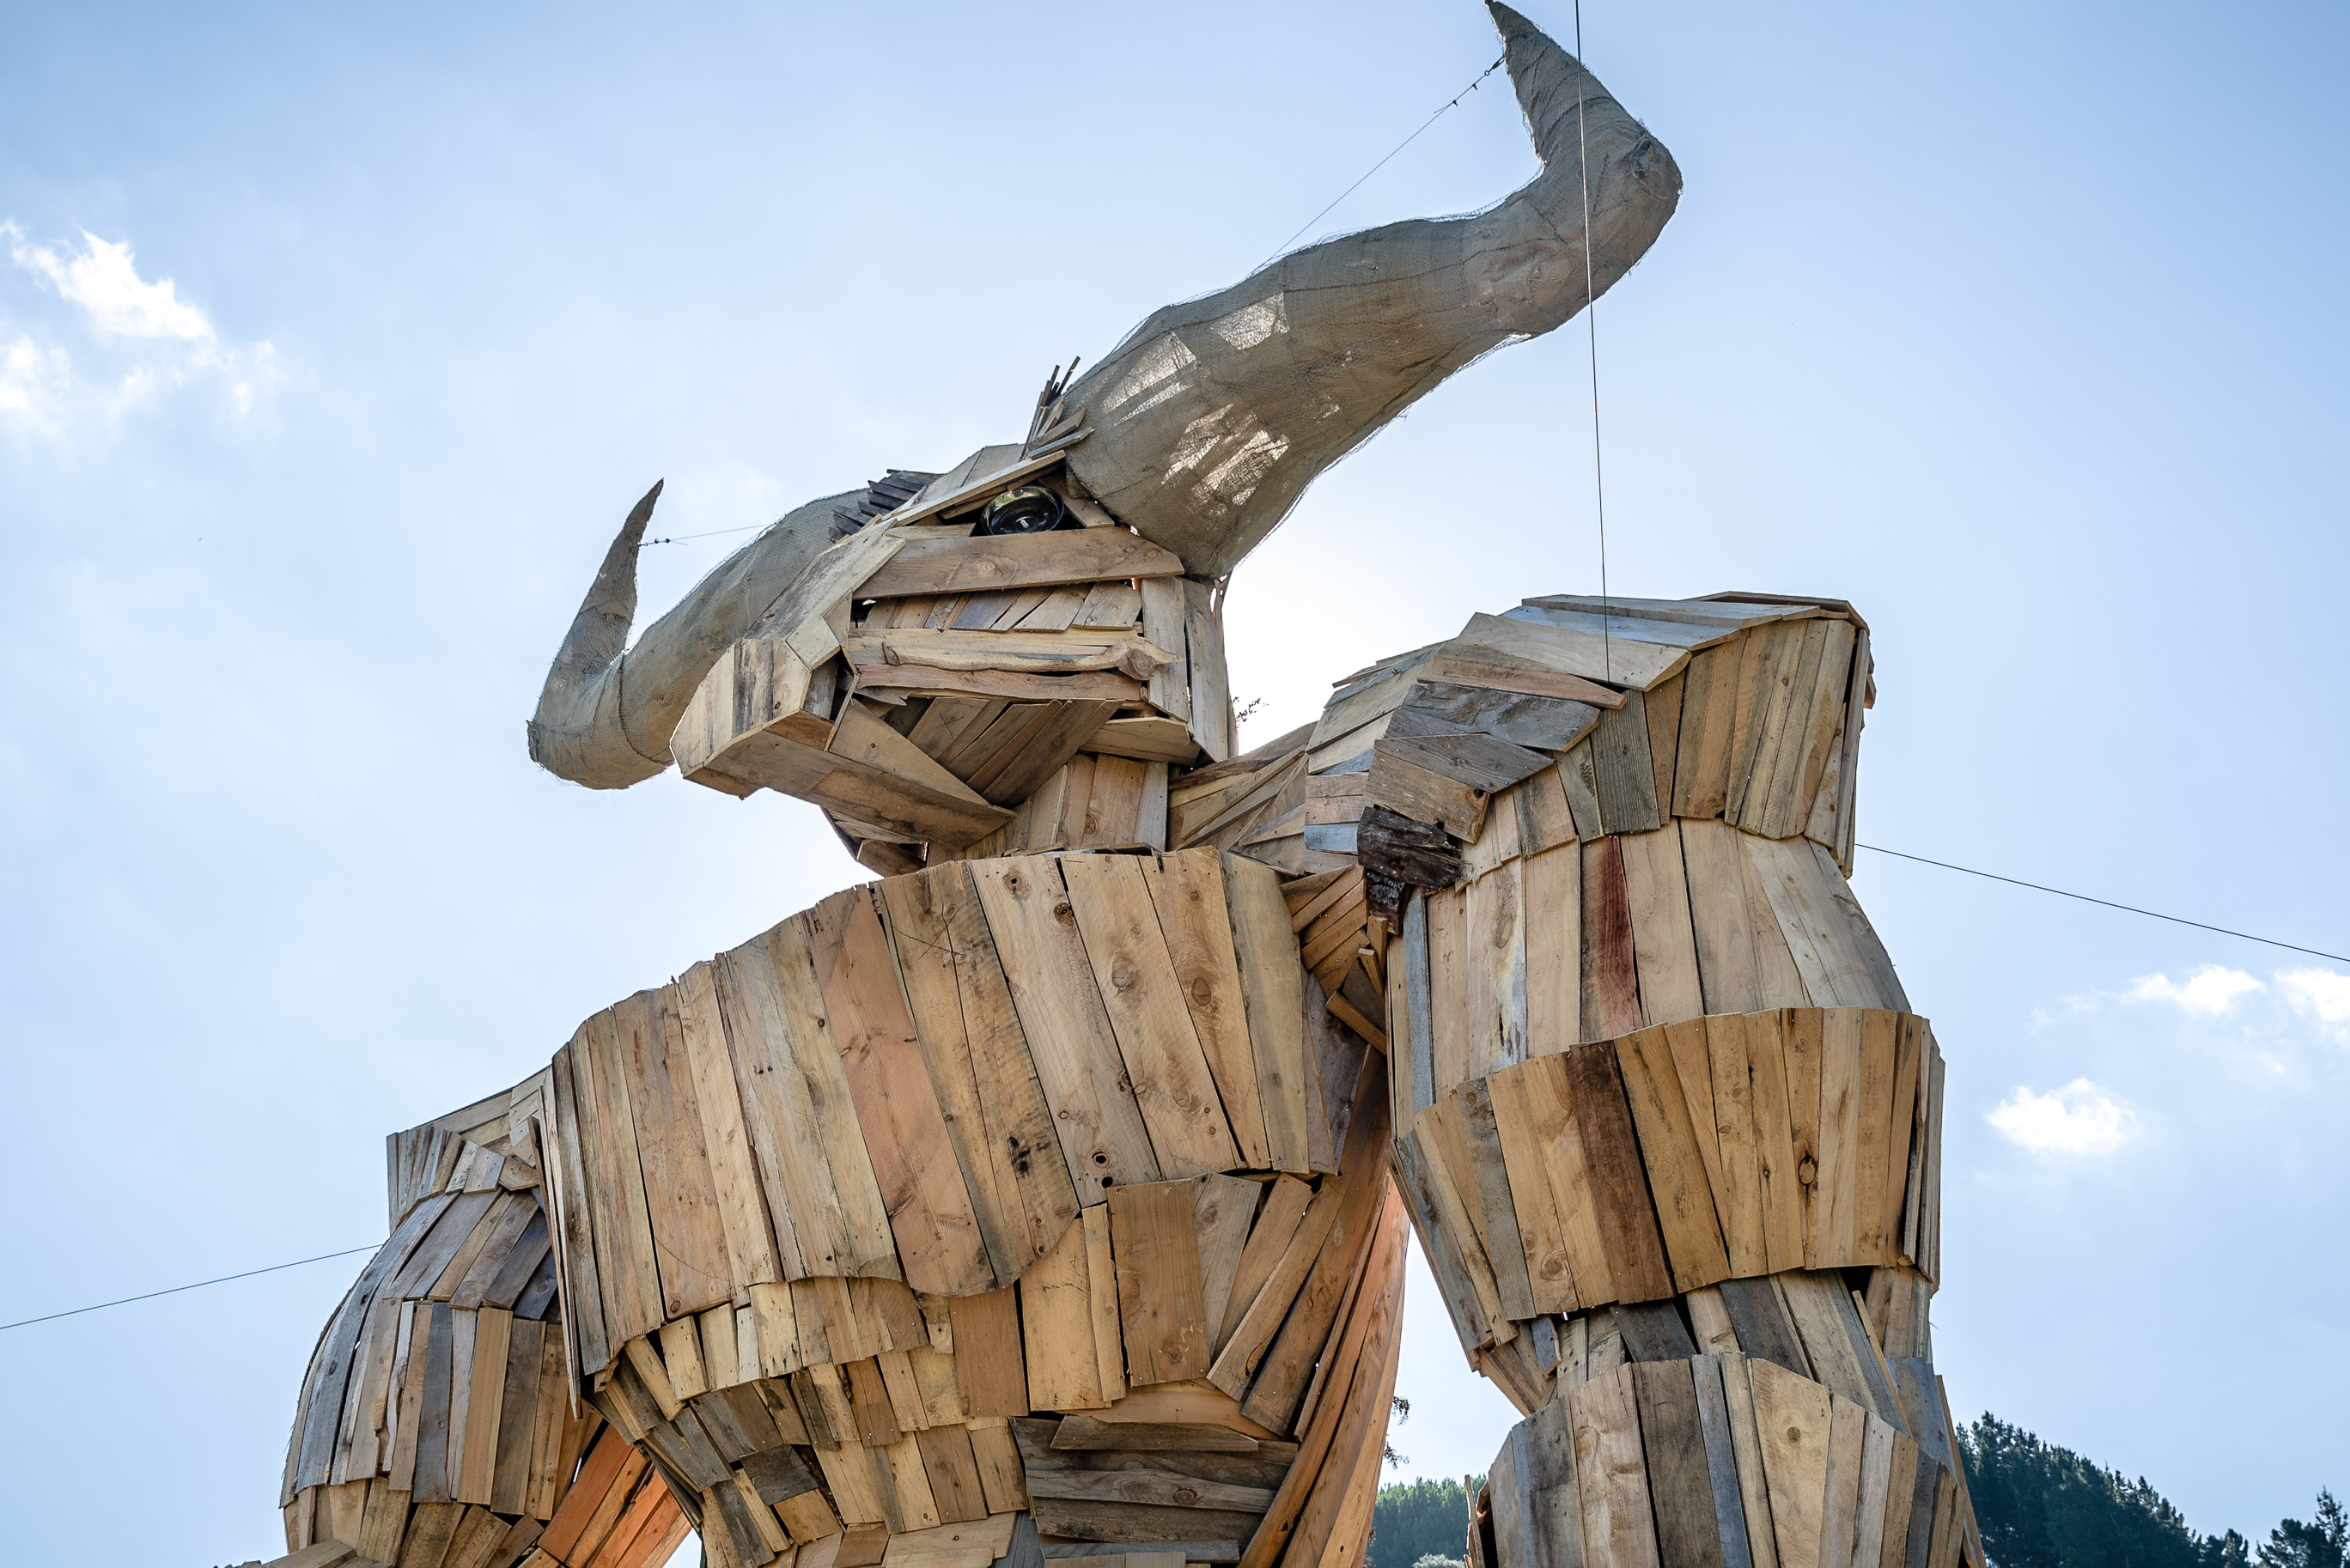 Effigy 2018 by Andy Flint. Minotaur built of palettes with horns